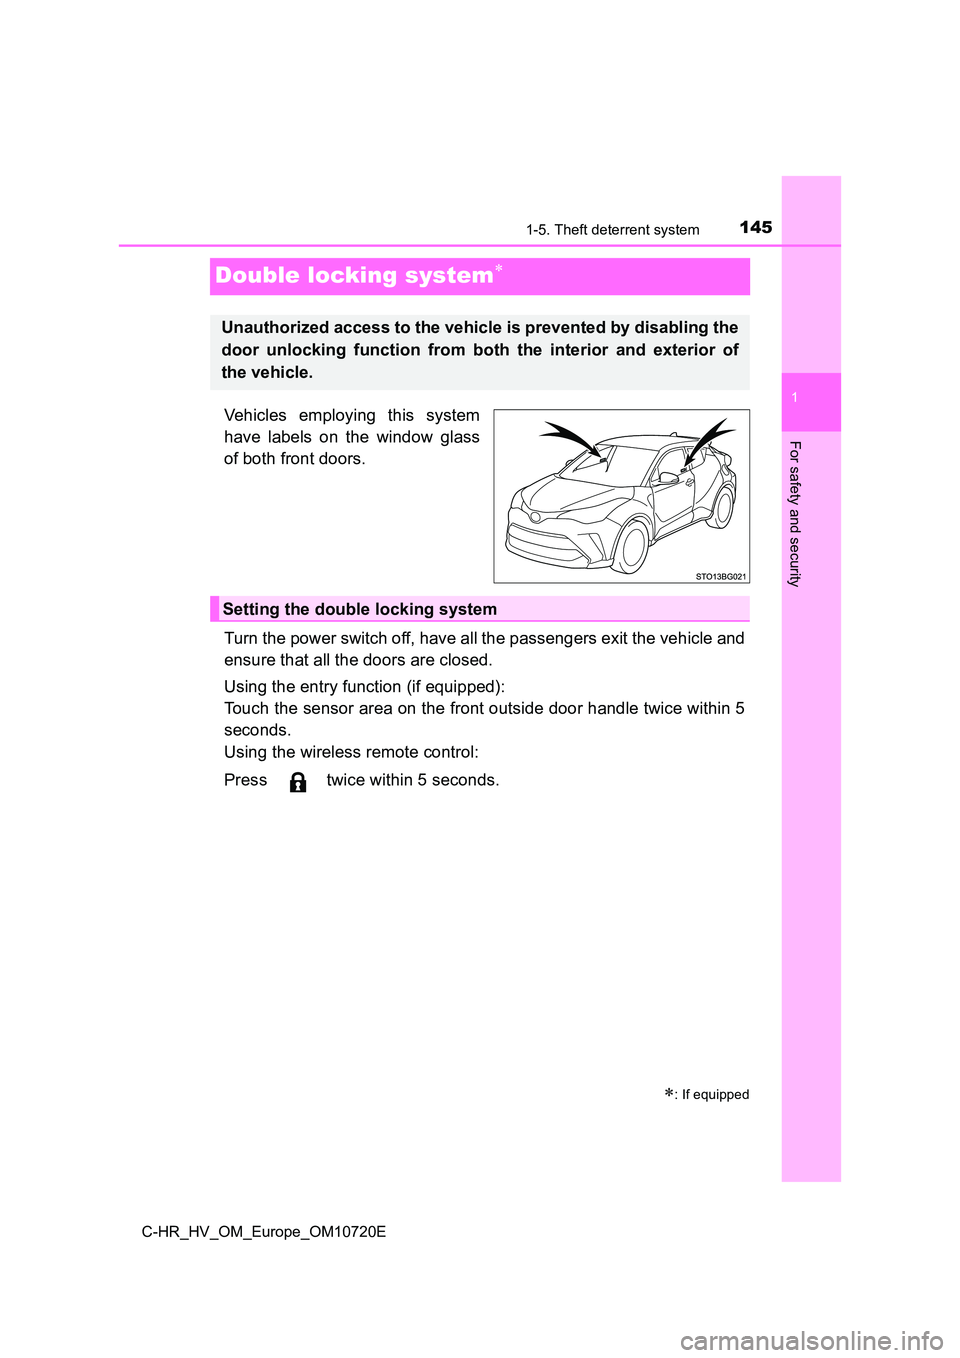 TOYOTA C-HR 2022  Owners Manual 145
1
1-5. Theft deterrent system
For safety and security
C-HR_HV_OM_Europe_OM10720E
Double locking system
Vehicles  employing  this  system 
have  labels  on  the  window  glass 
of both front doo